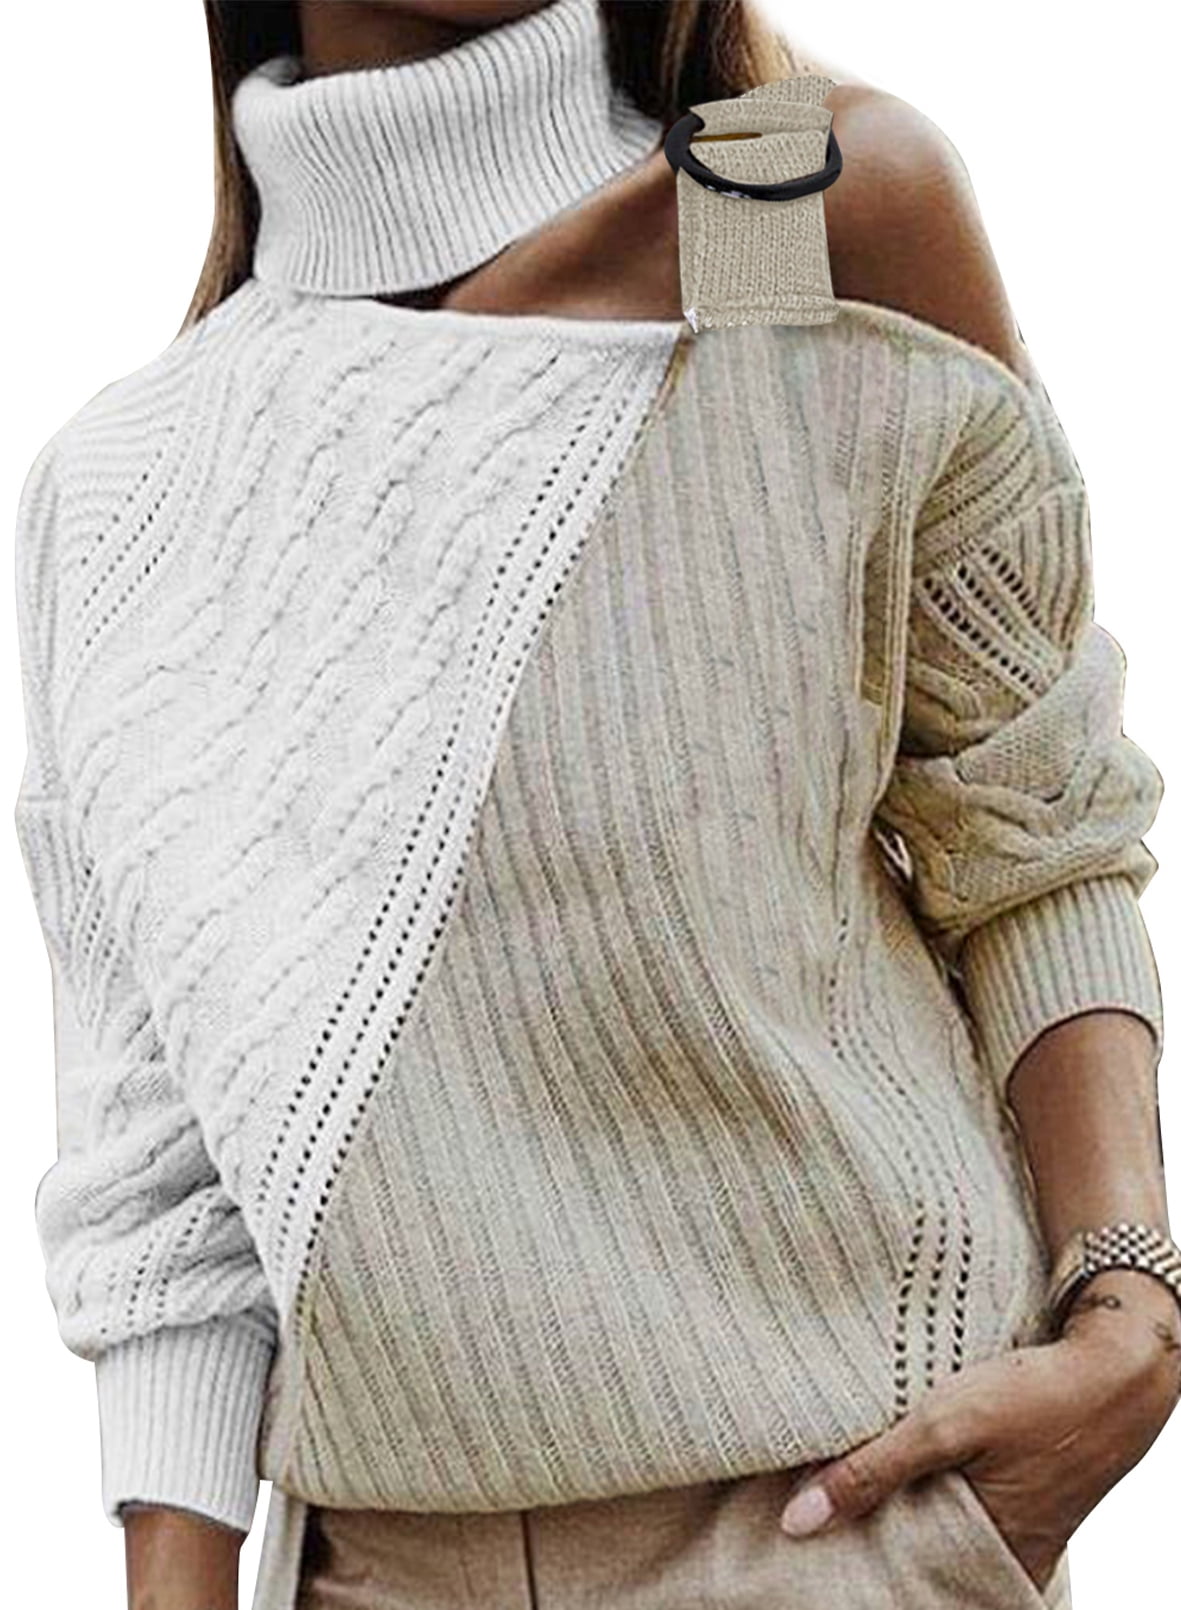 CoolEnding Womens Round Neck Striped Loose Sweater Long Sleeve Pullovers Loose Casual Tops 